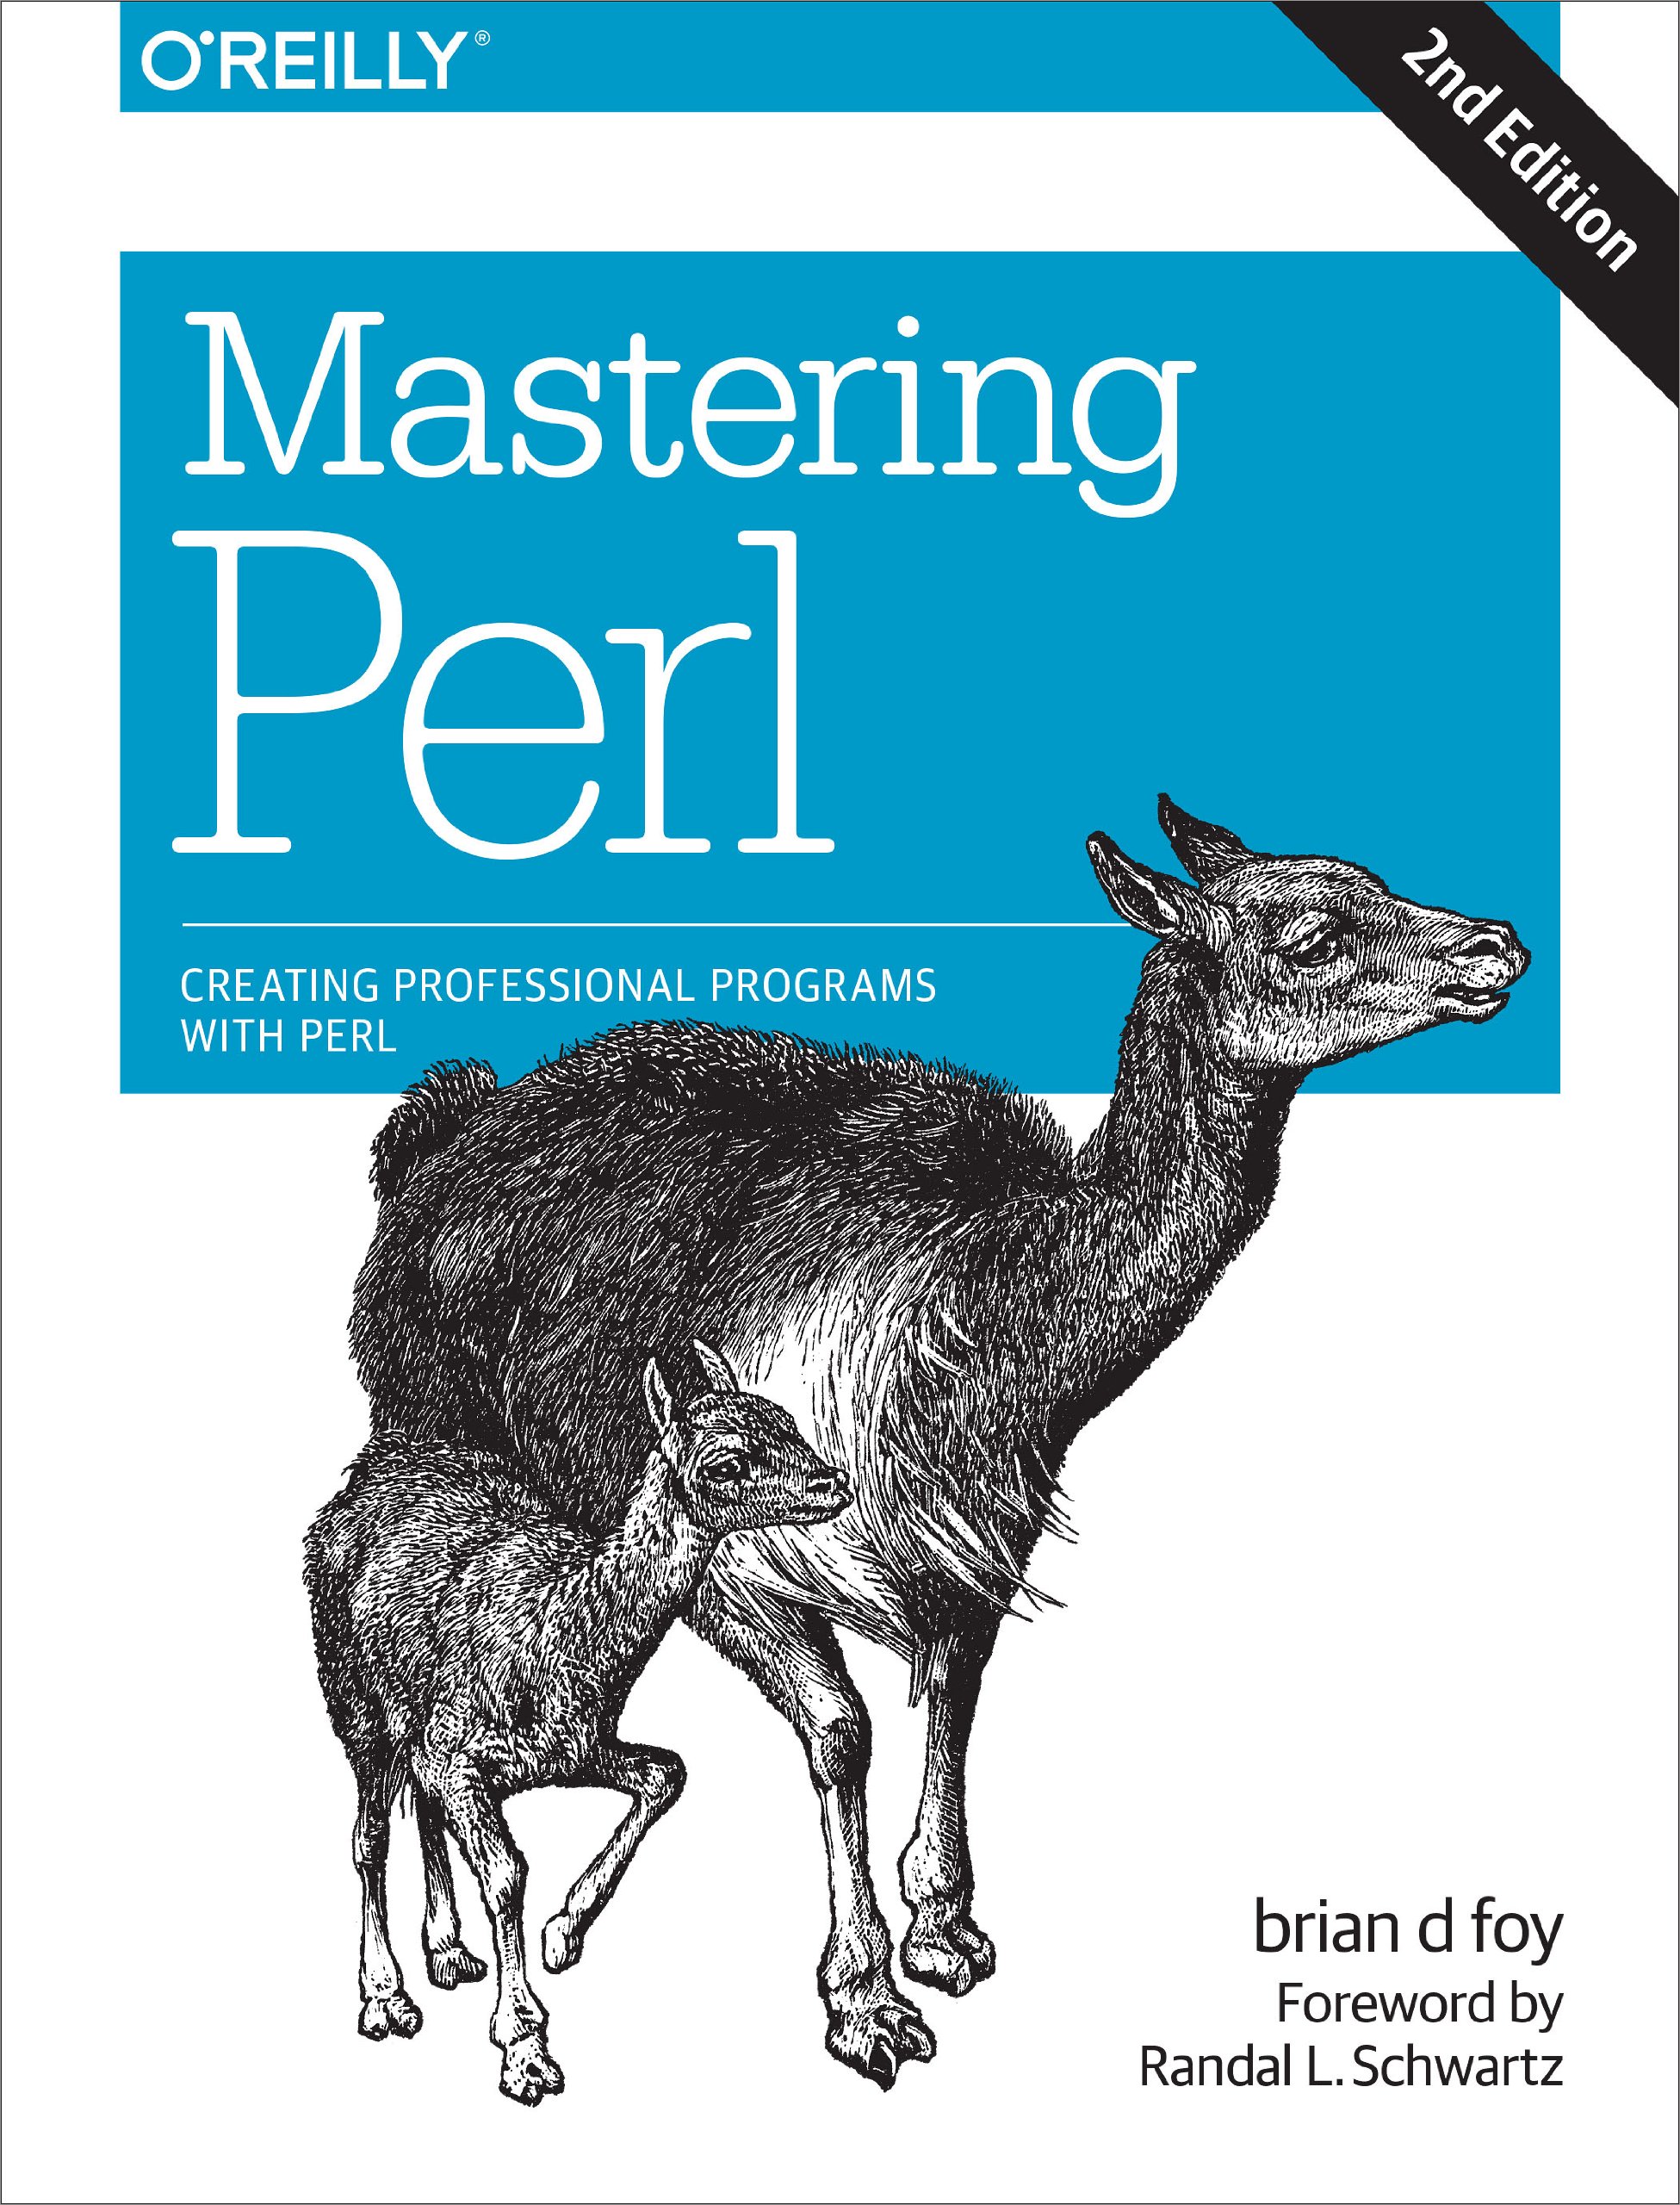 brian d foy: Mastering Perl: Creating Professional Programs with Perl (2014, O'Reilly Media)